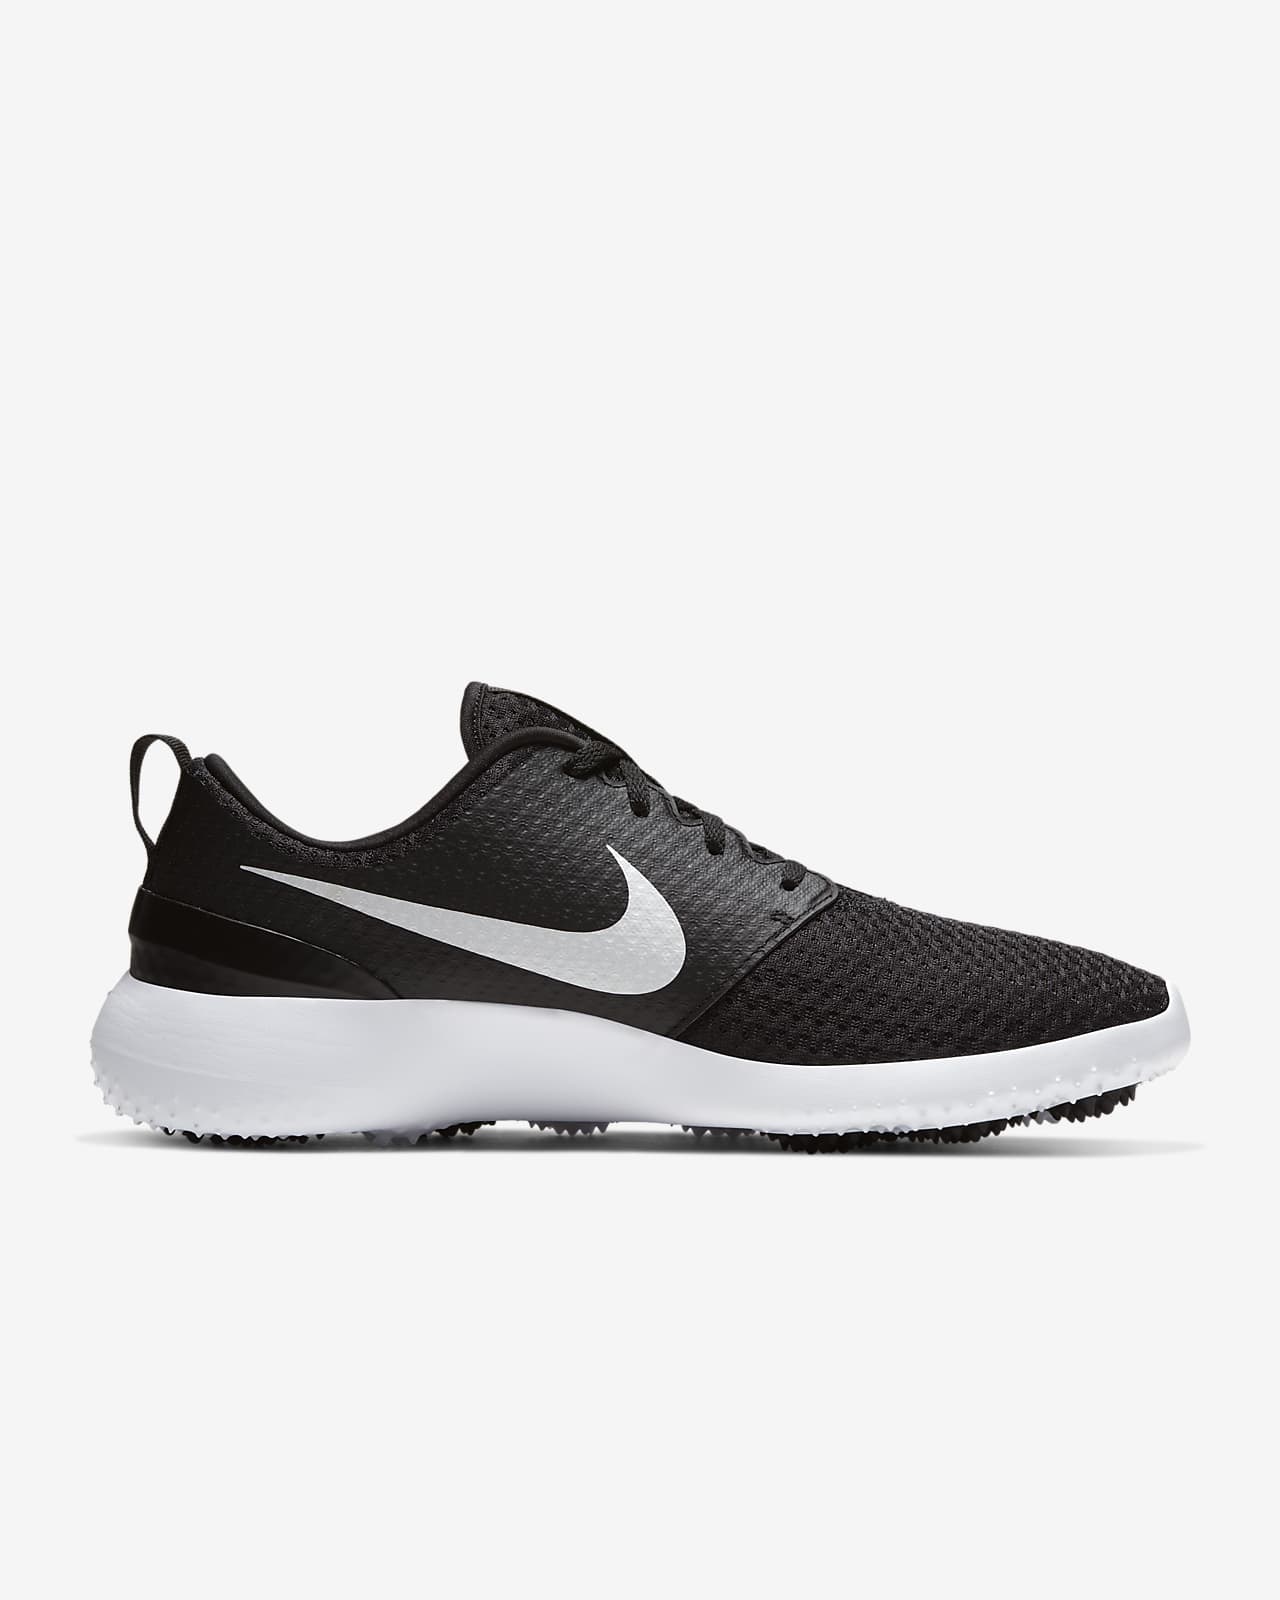 Regnerisch Kamm Grippe nike shoes that look like roshes but aren t ...